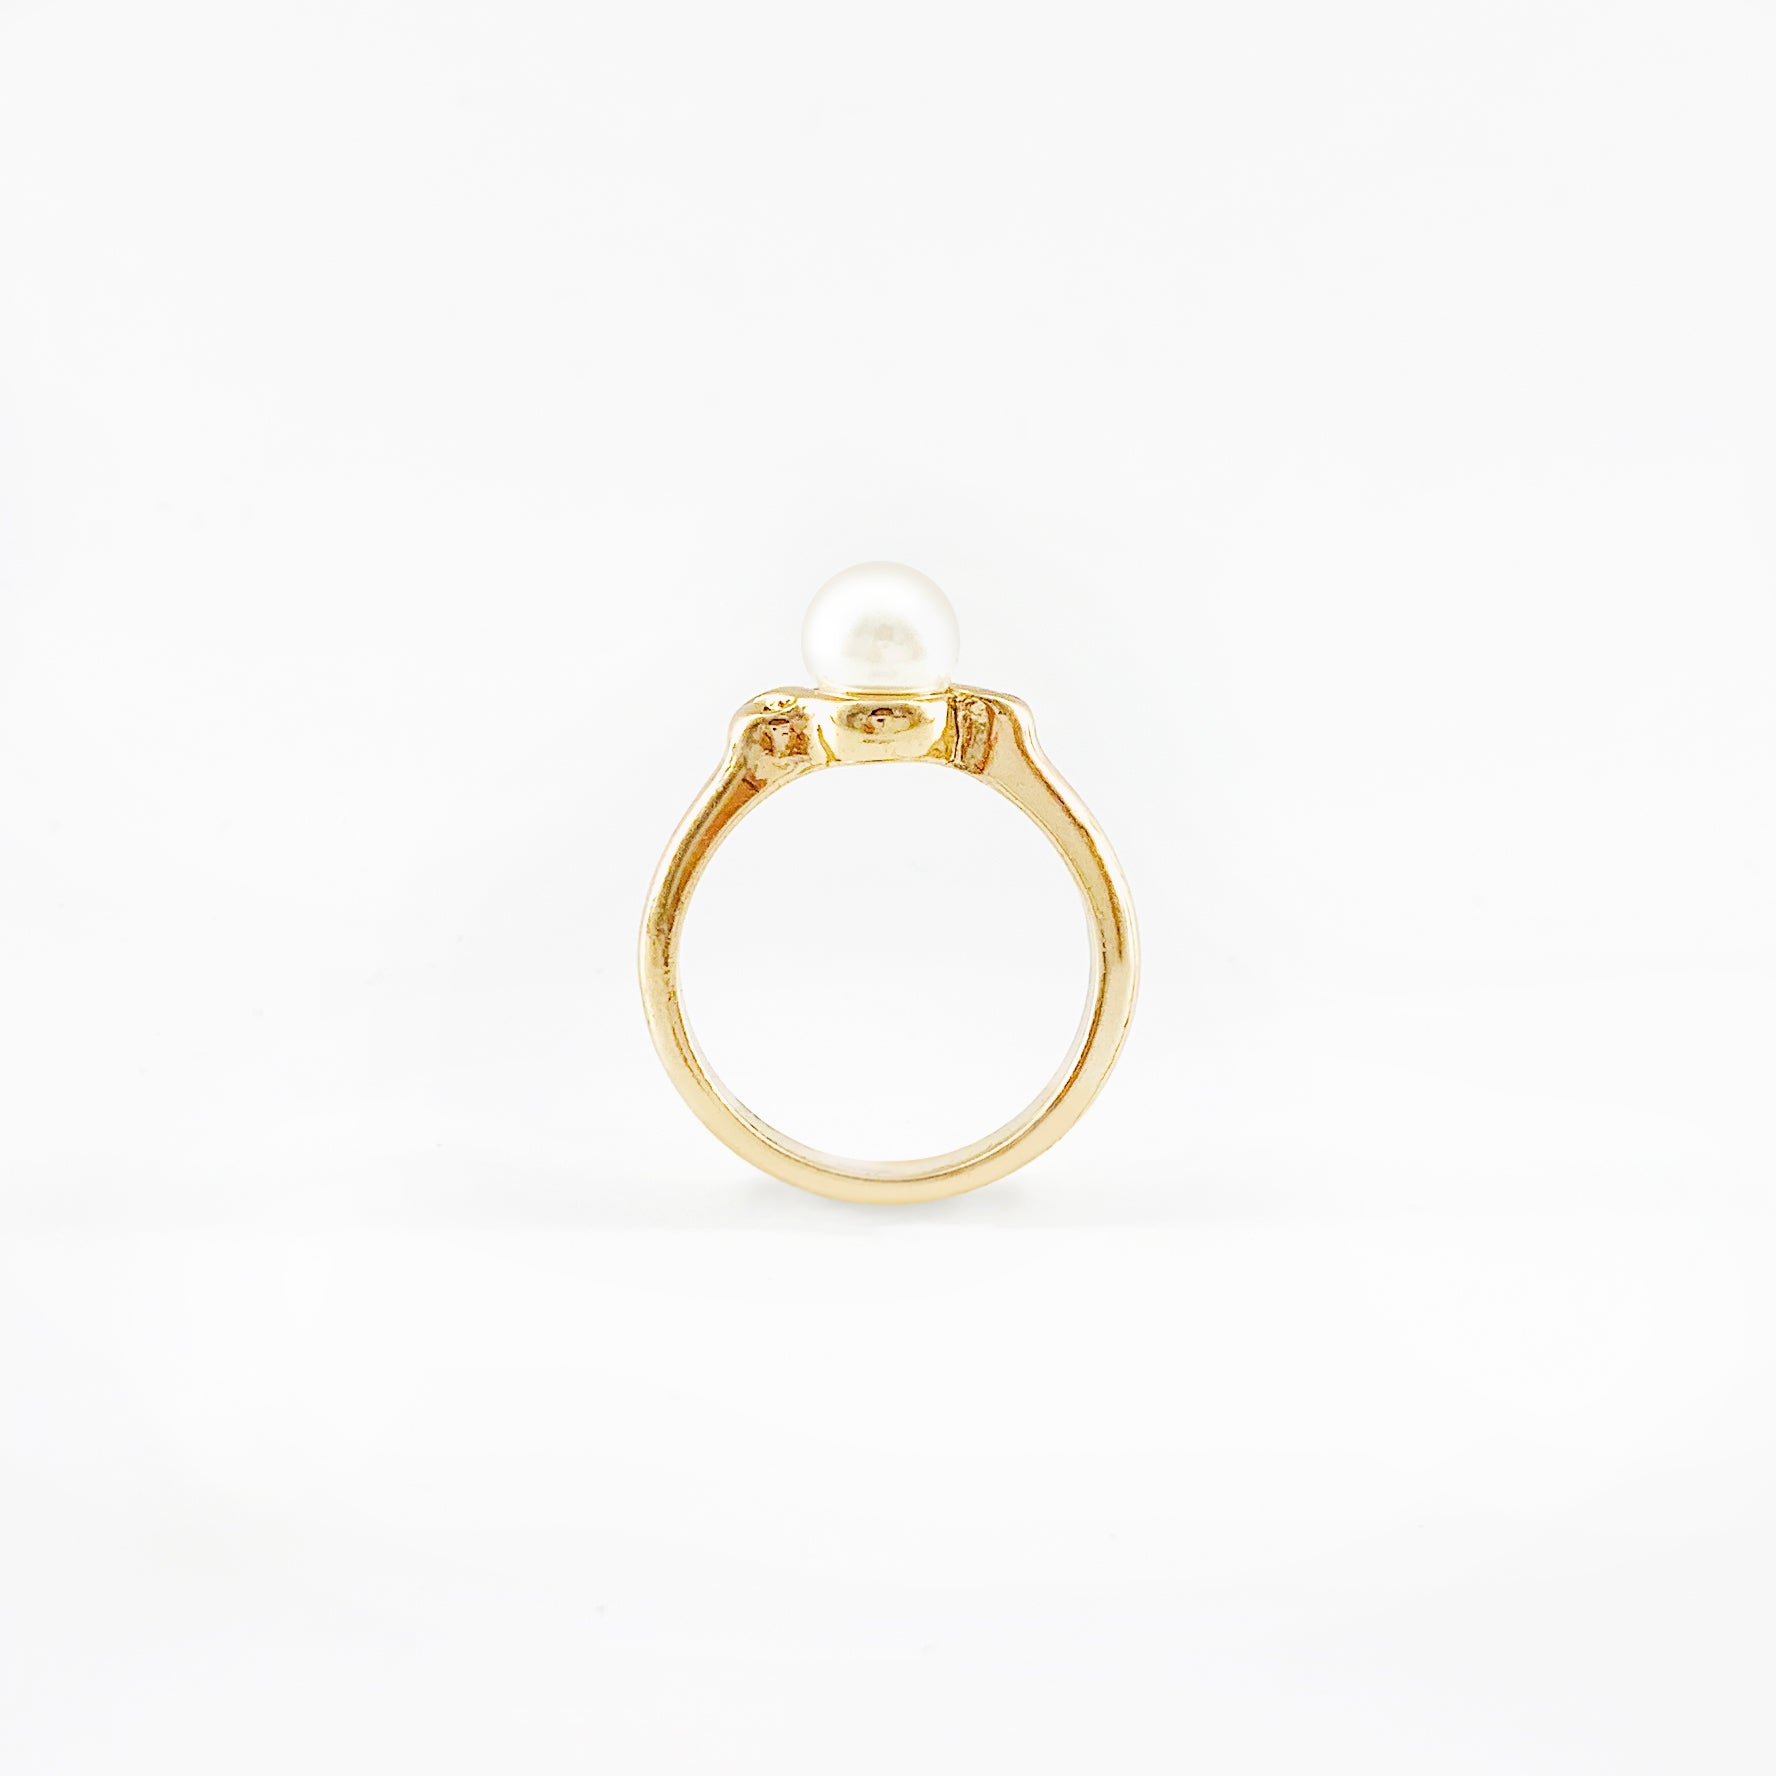 Pearl ring with gold band